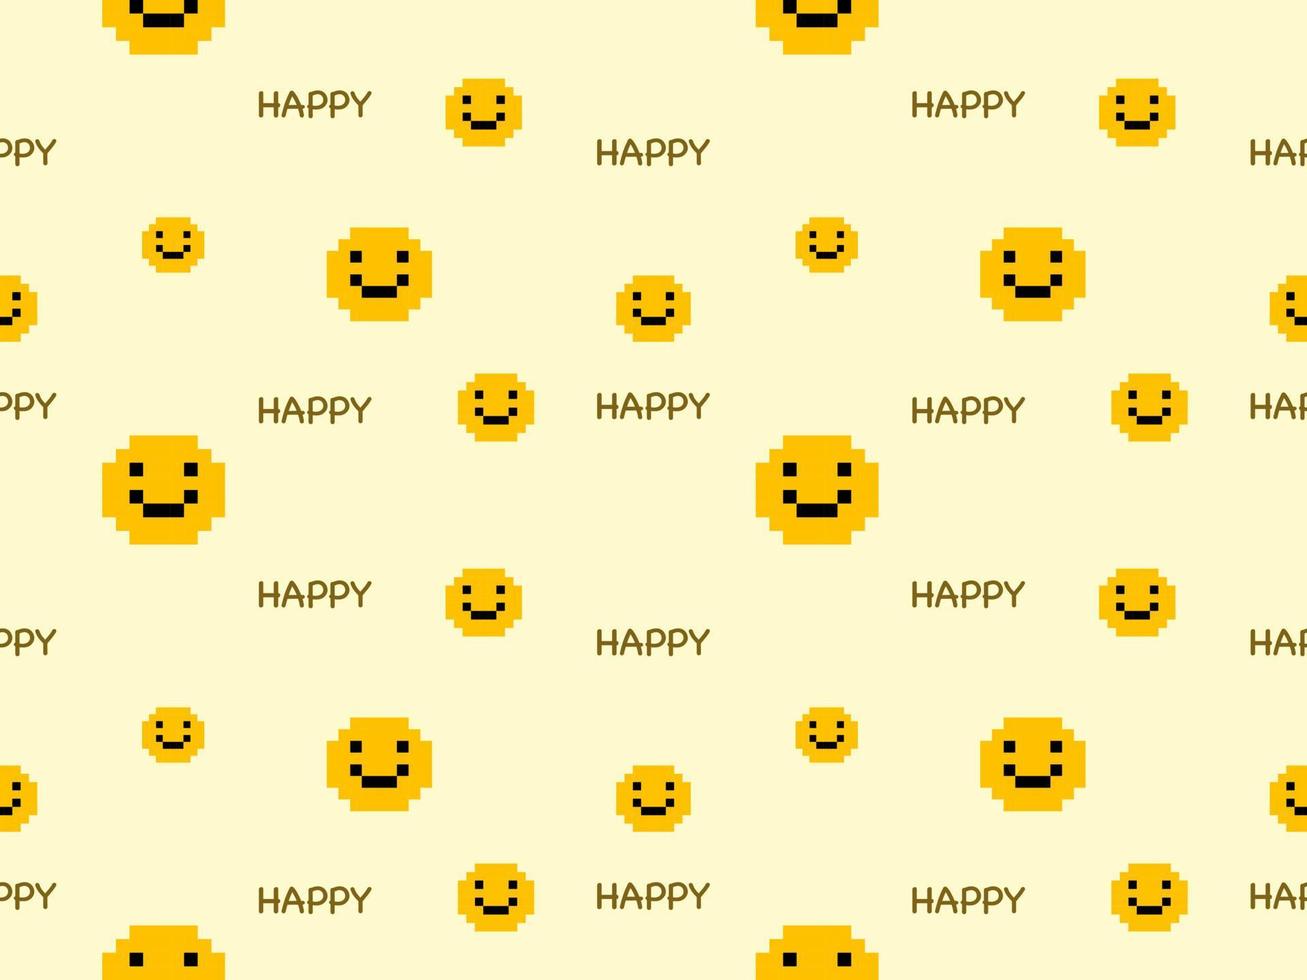 Smile cartoon character seamless pattern on yellow background.Pixel style vector